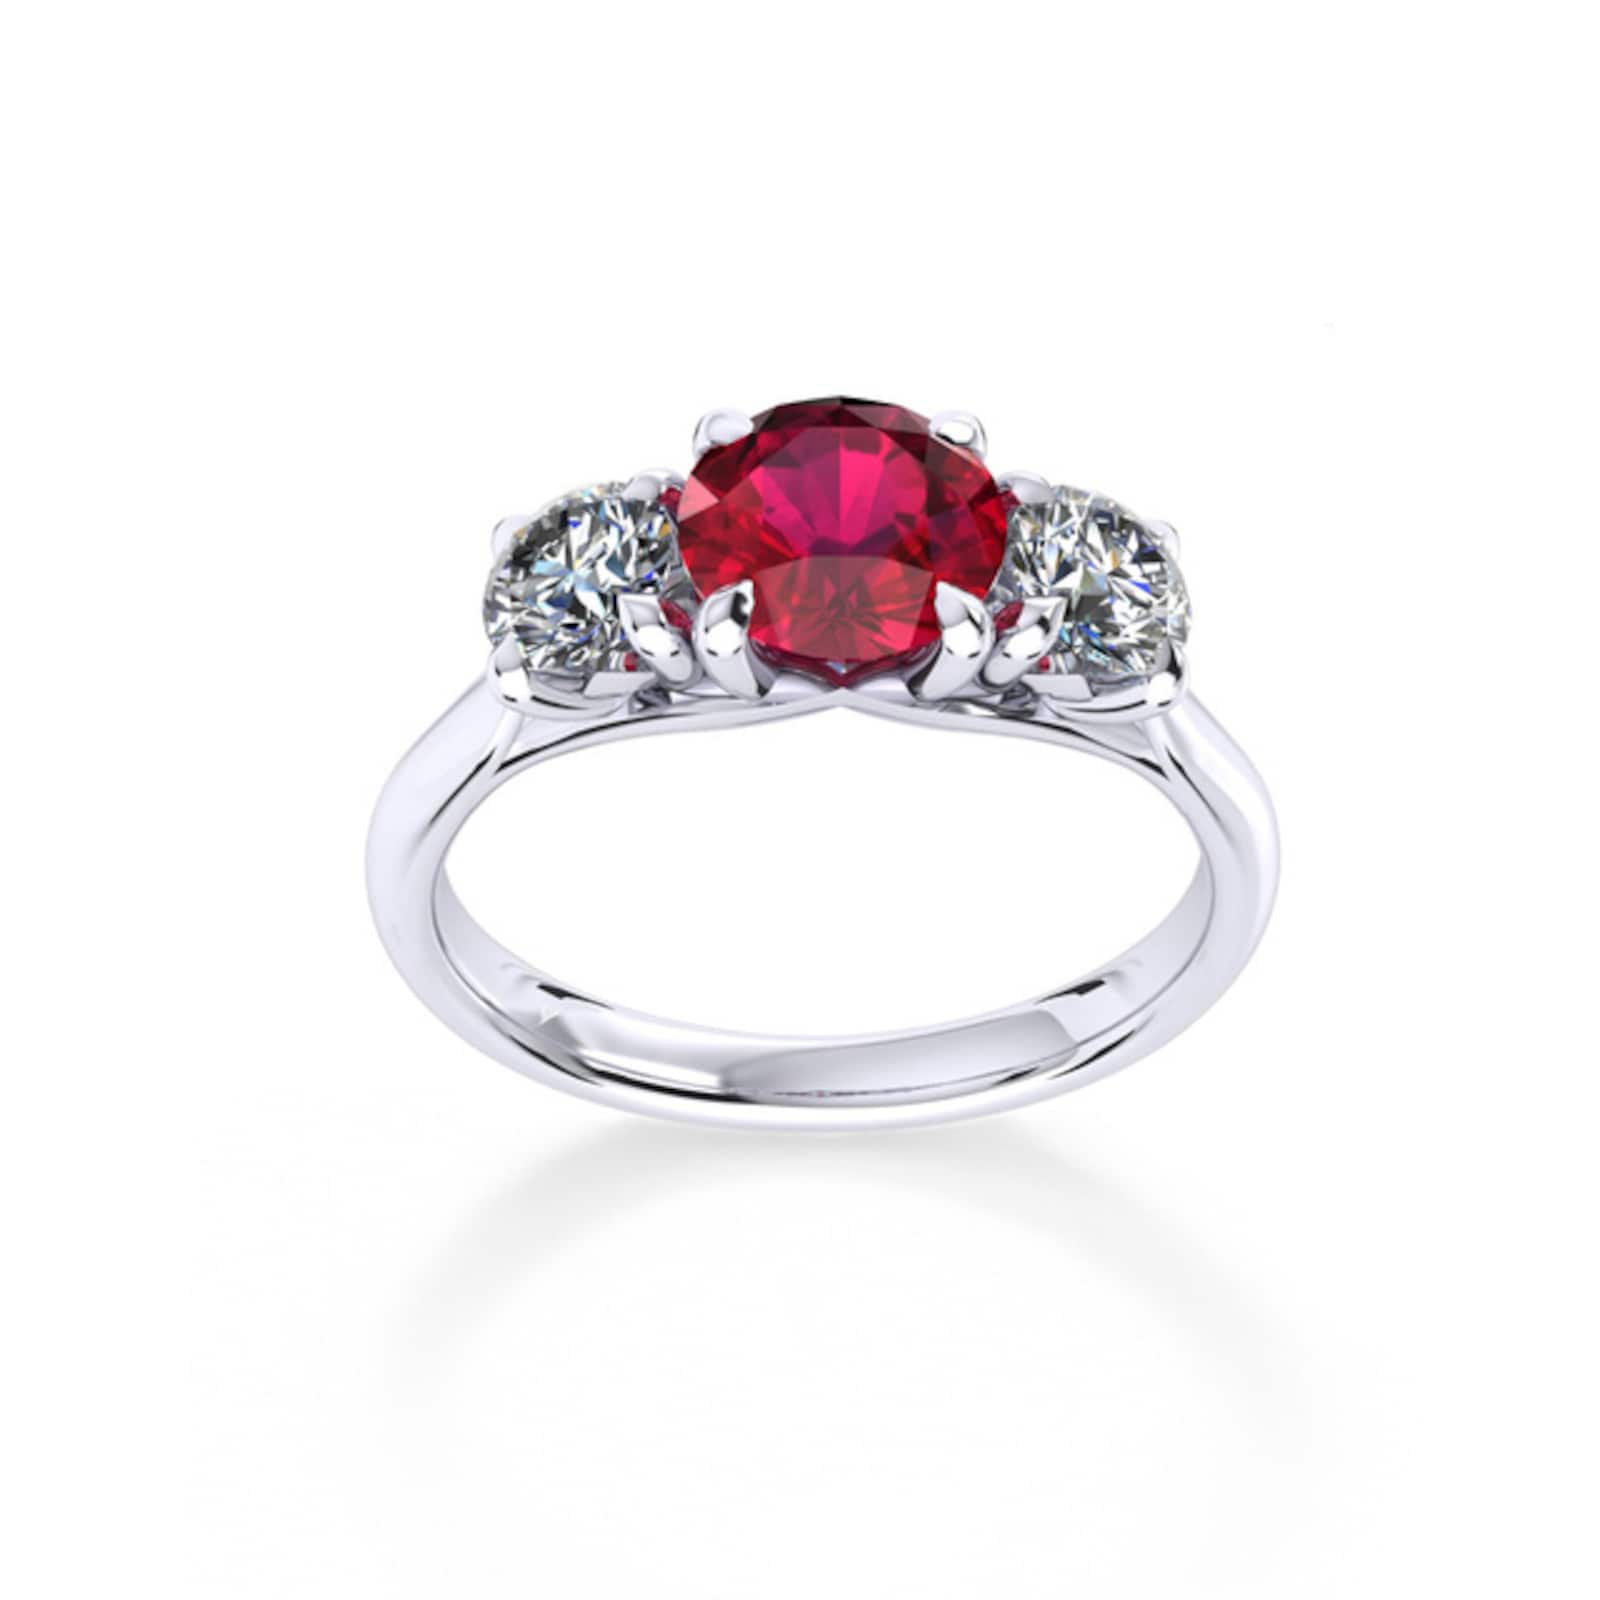 Mappin & Webb Ena Harkness Platinum And Three Stone 6mm Ruby Ring Plat ...